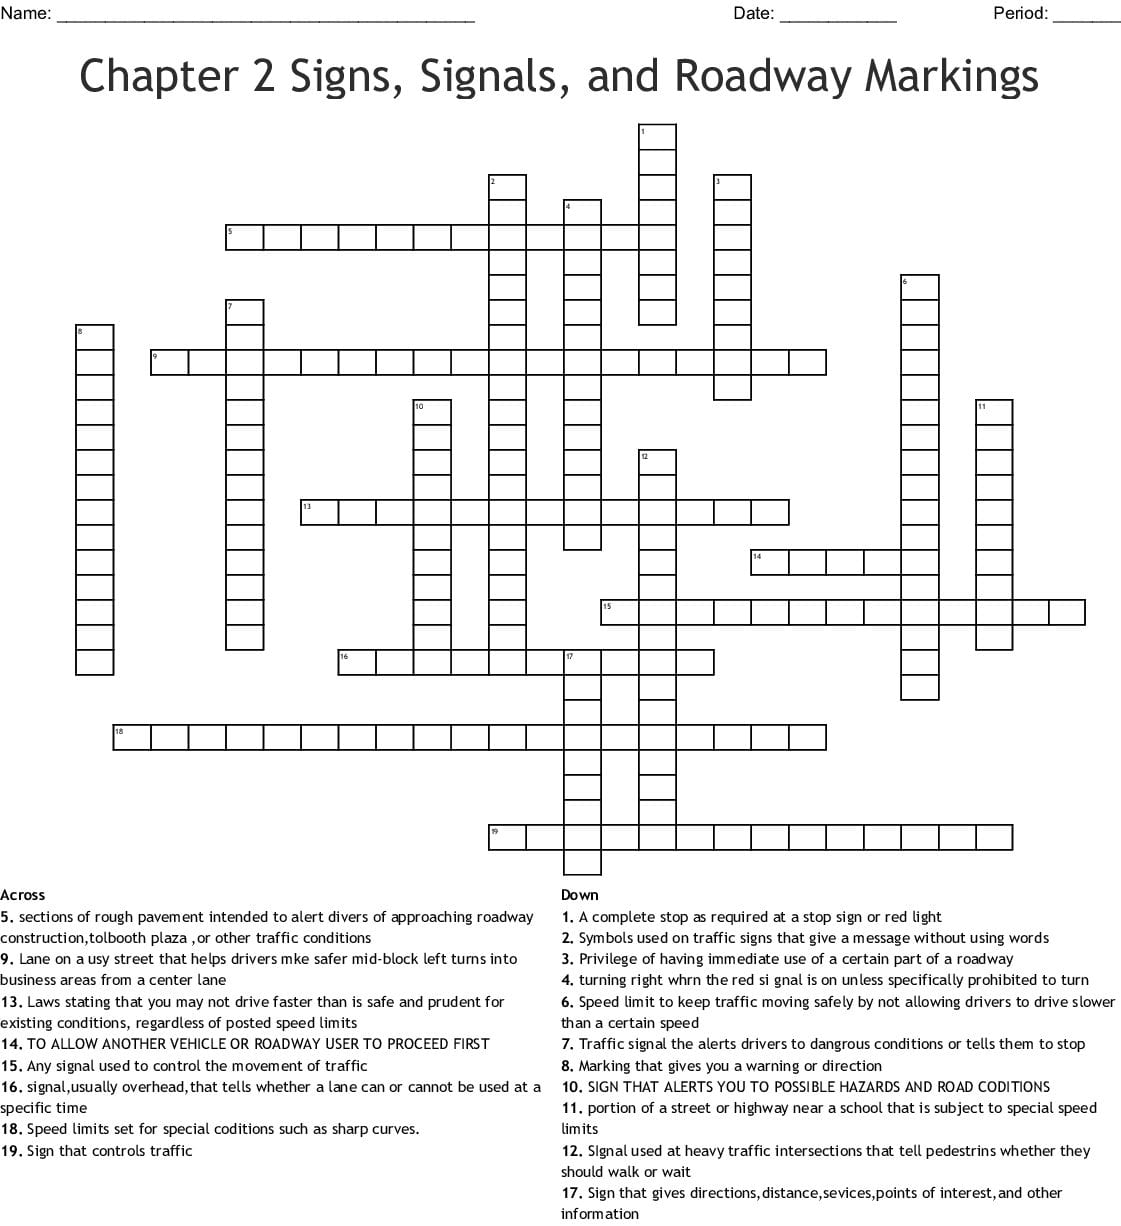 Chapter 2 Signs Signals And Roadway Markings Worksheet Answers db